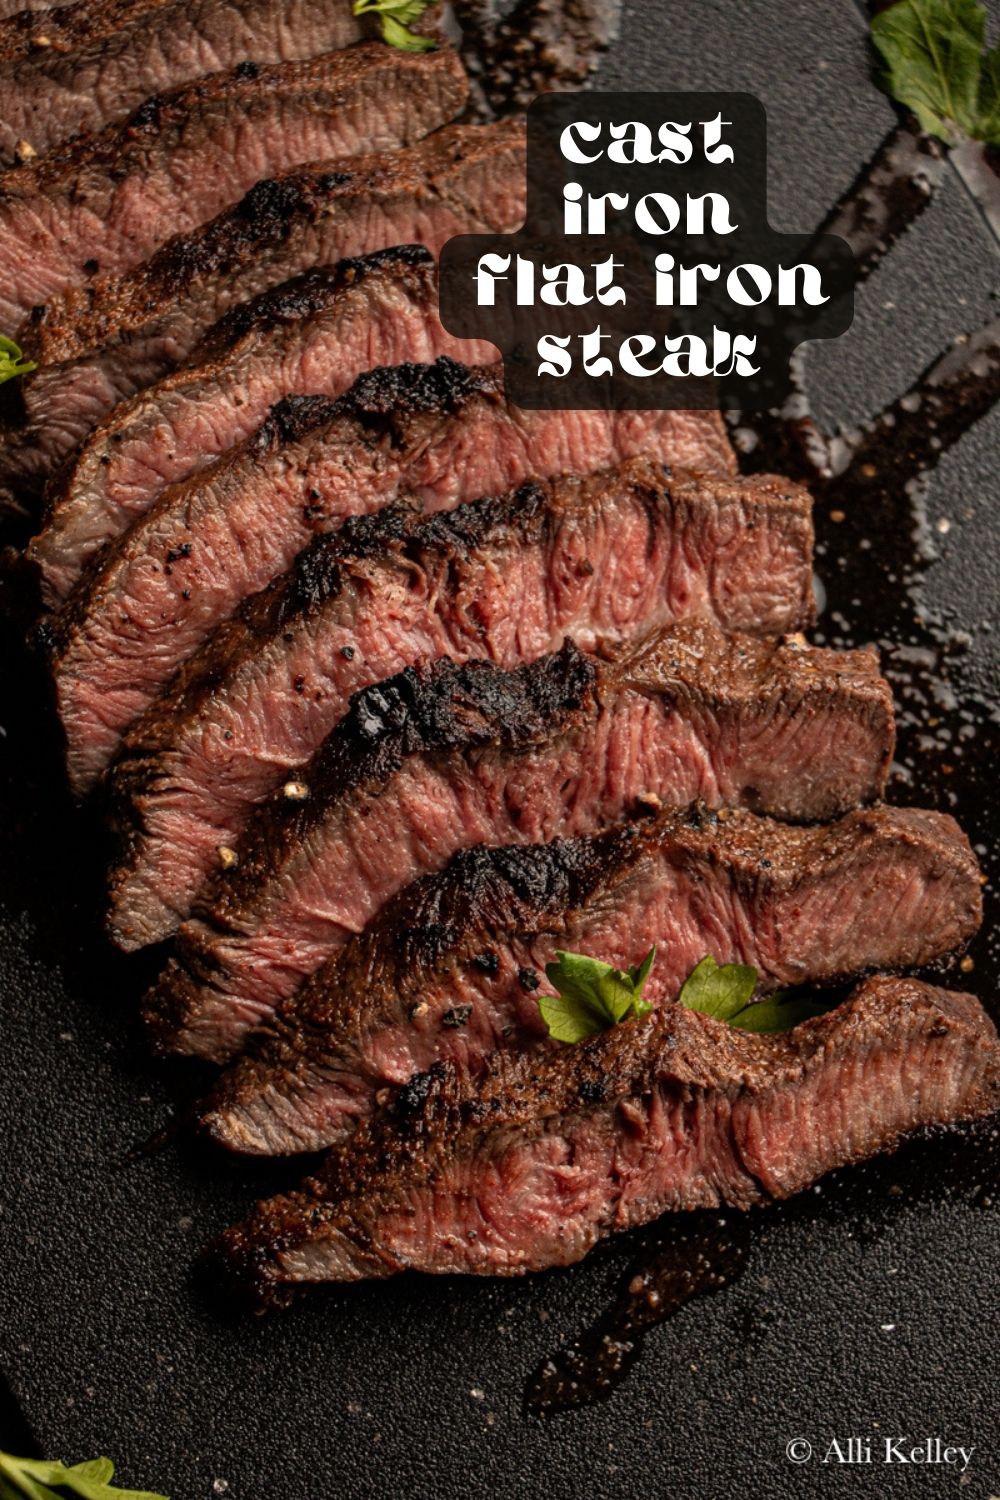 Flat iron steak is one of the most underrated yet delicious cuts of beef. Juicy, tender, and packed full of flavor, it's a real treat! My flat iron steak recipe takes this cut of meat to the next level with a simple marinade that adds even more flavor. Plus, once you know how to cook flat iron steak - you can have restaurant-worthy steak at home whenever you want!